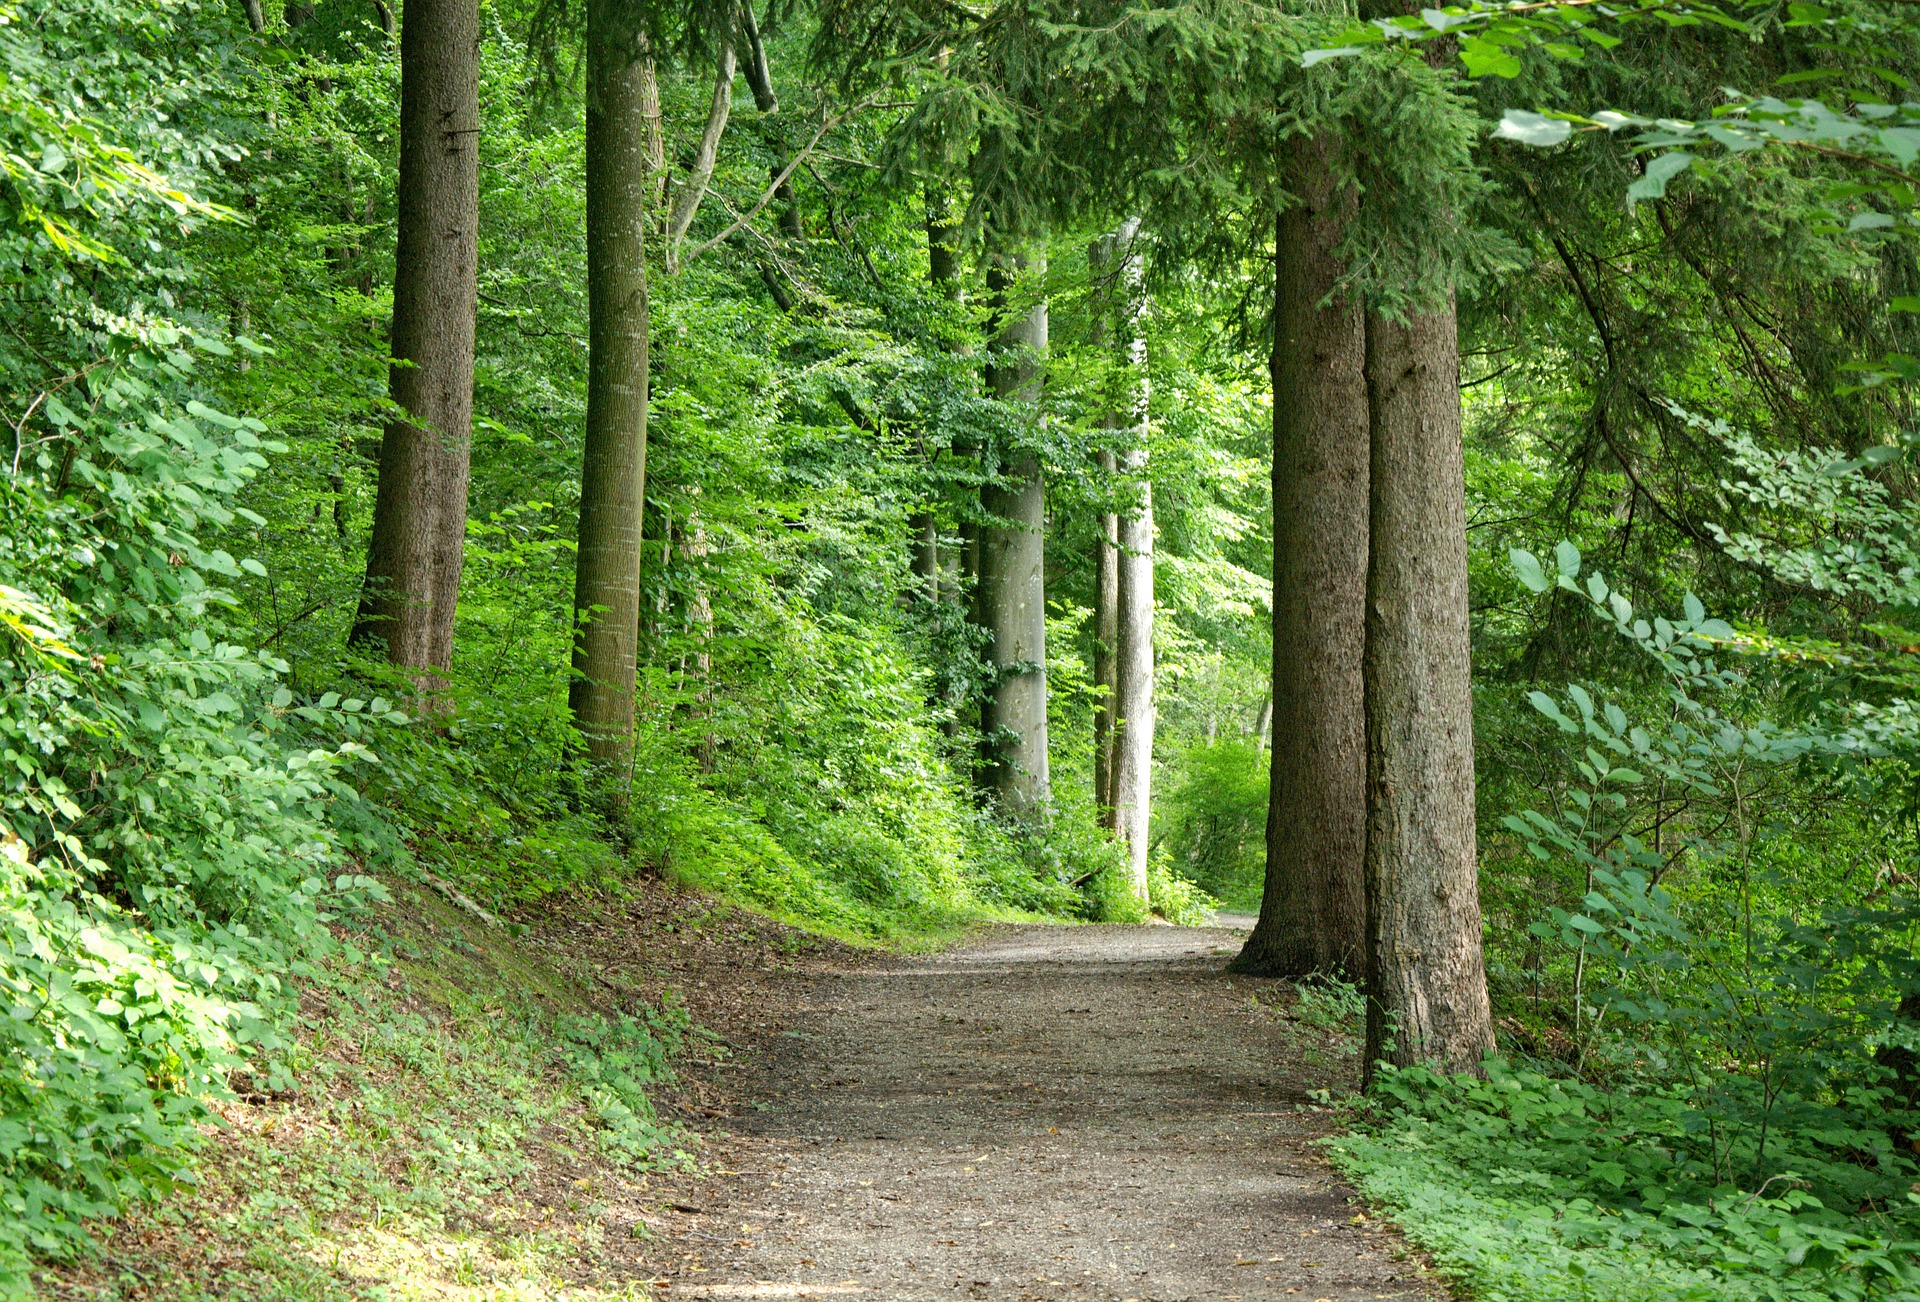 A wooded path